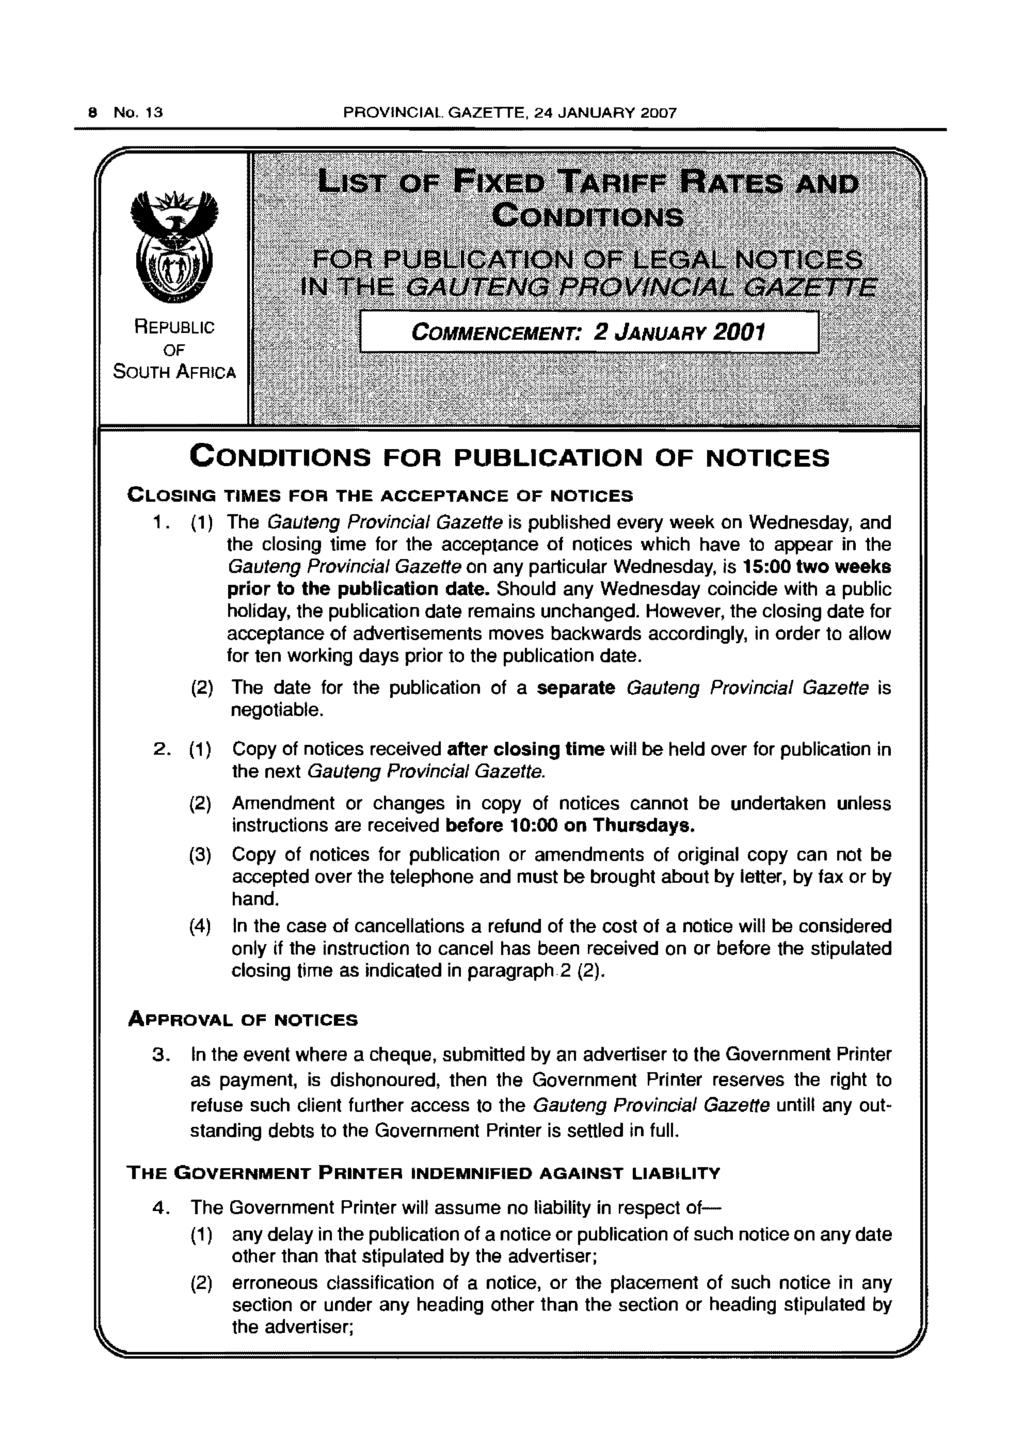 8 No. 13 PROVINCIAL GAZETTE, 24 JANUARY 2007 REPUBLIC OF SOUTH AFRICA CONDITIONS FOR PUBLICATION OF NOTICES CLOSING TIMES FOR THE ACCEPTANCE OF NOTICES 1.